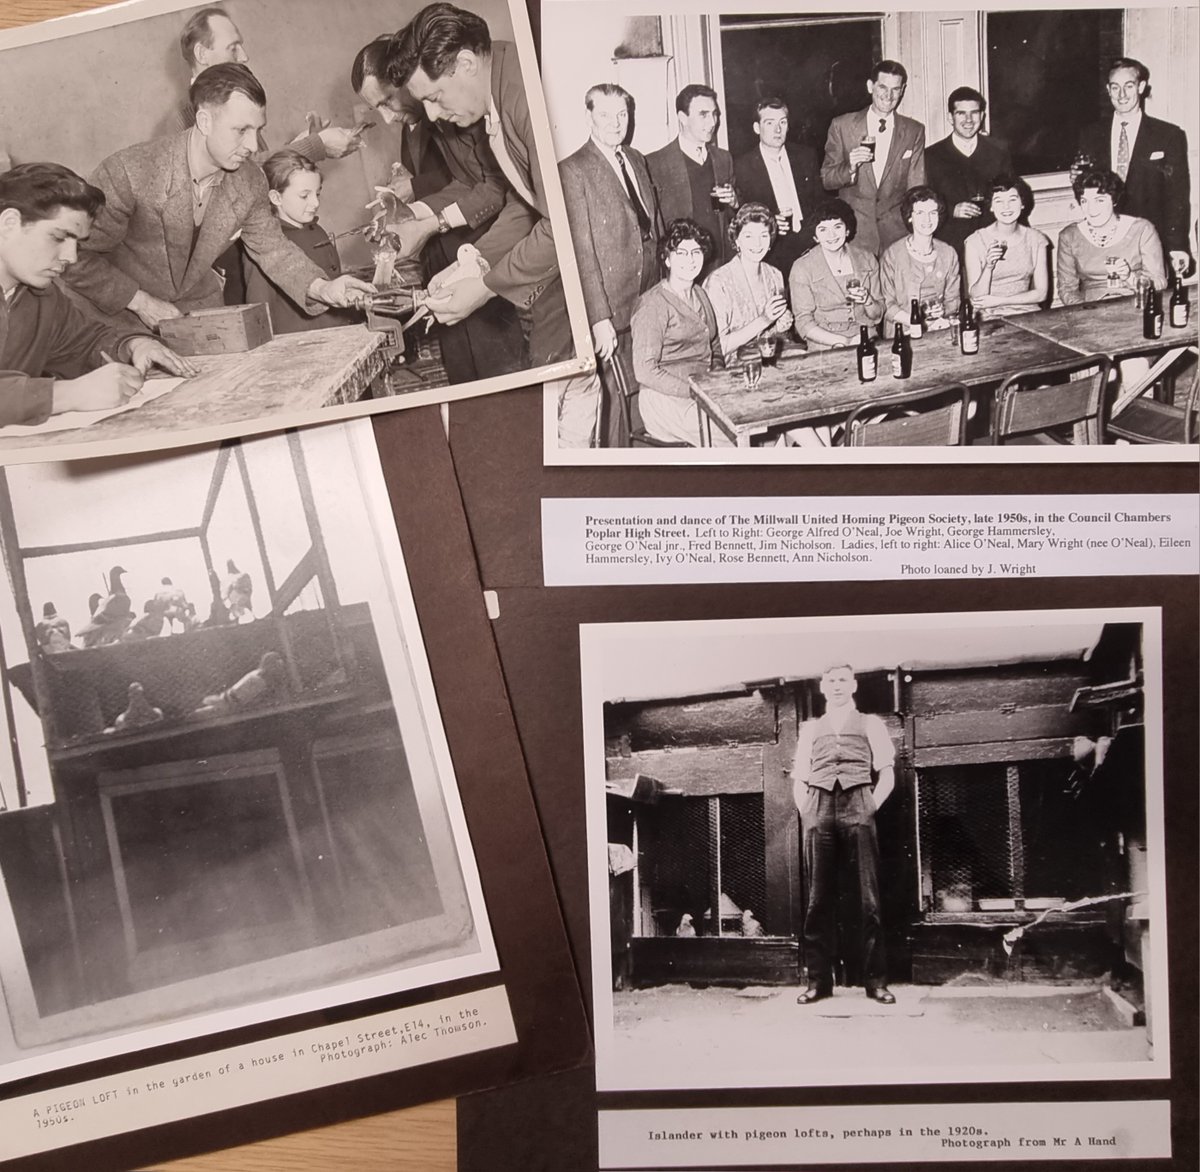 Did you know pigeon-fancying used to be a popular pastime in Tower Hamlets? 🐦 

These photos from the wonderful Island History Trust collection show that residents on the Isle of Dogs had a long tradition of keeping the birds as pets and for racing #EYAHobbies